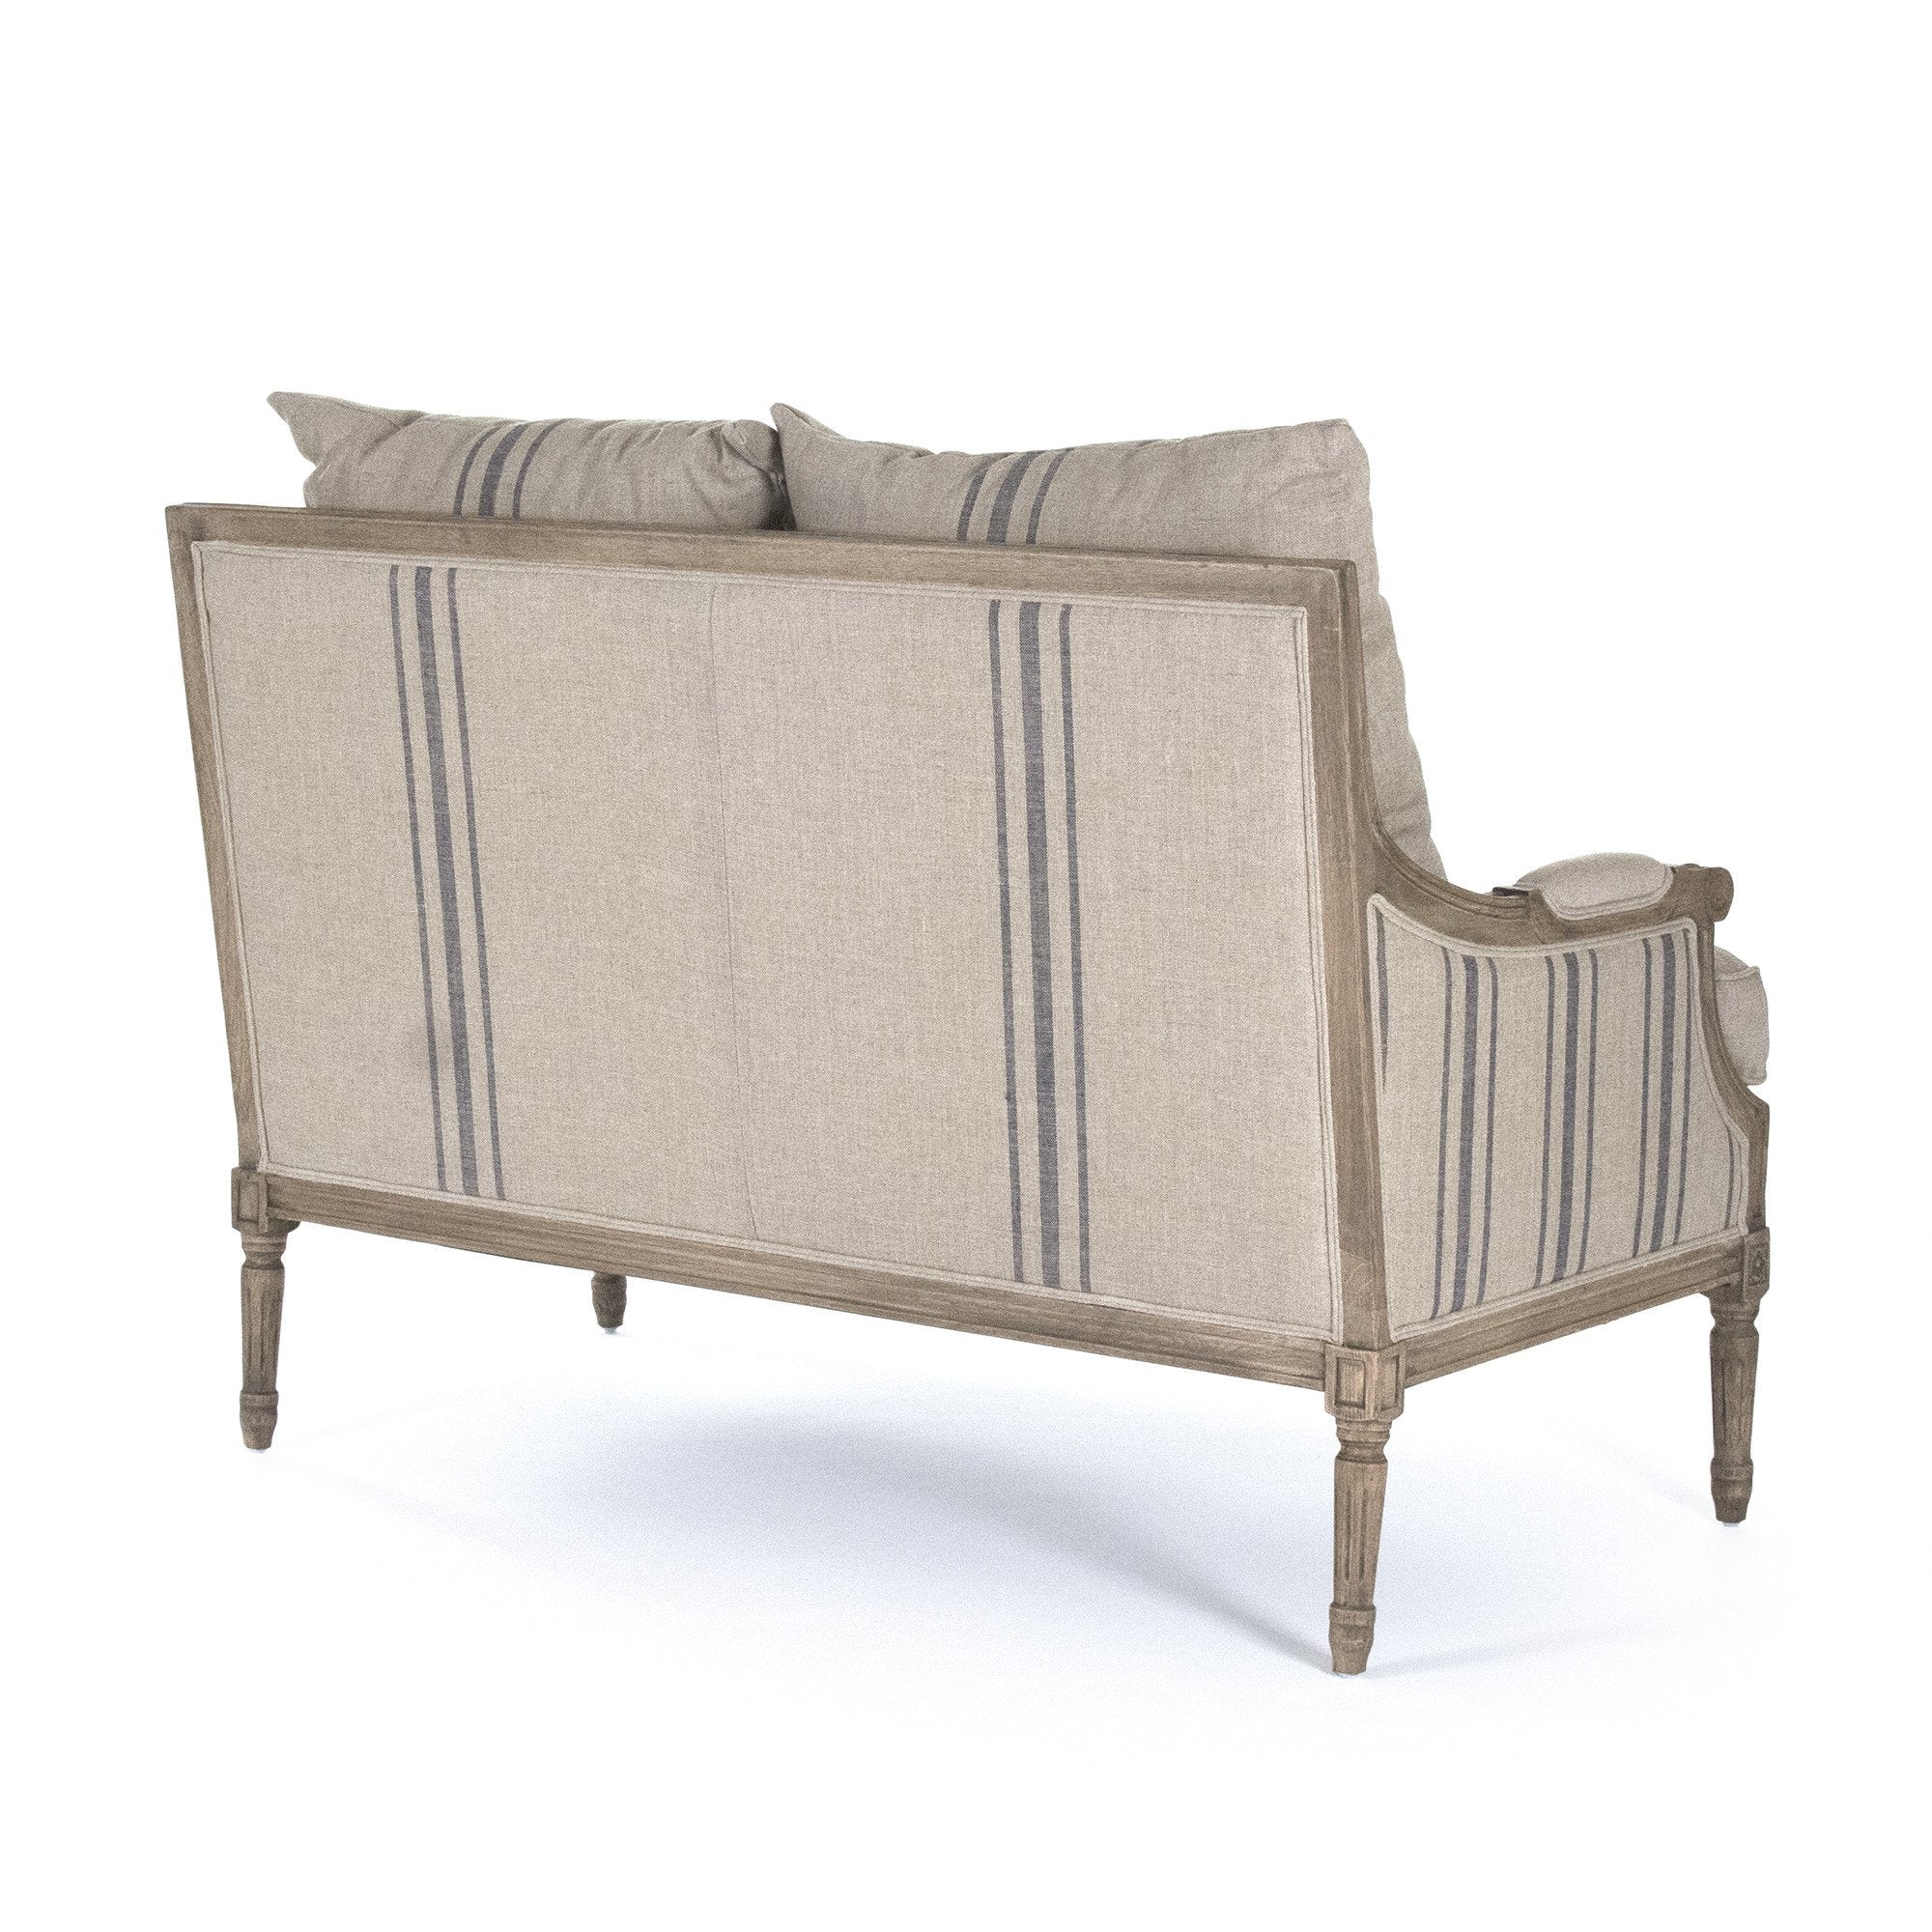 Striped French settee with cushions for sale, french linen and wood settee for sale